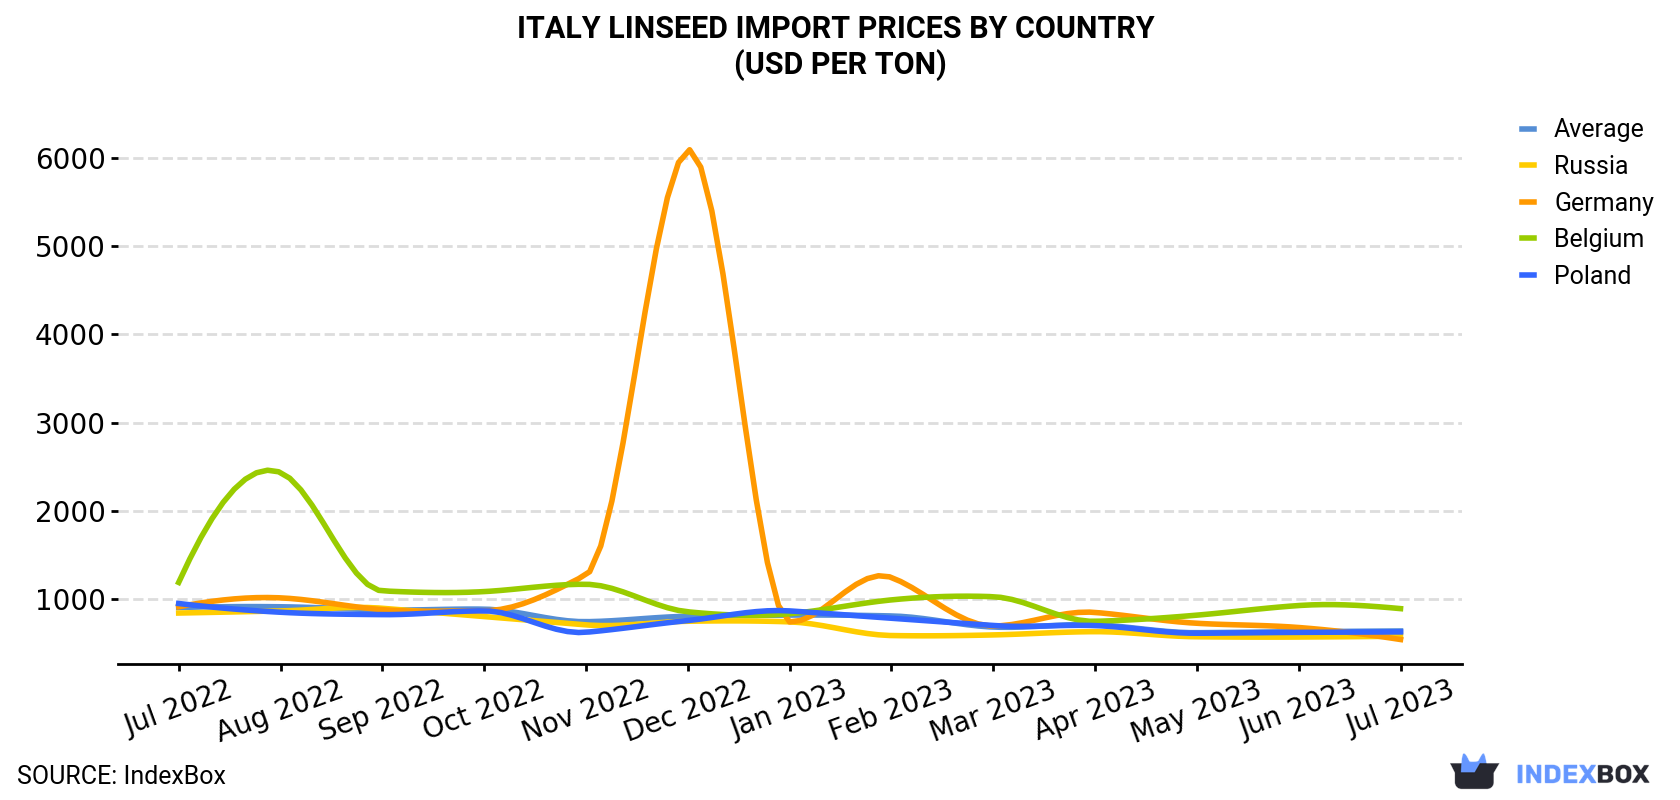 Italy Linseed Import Prices By Country (USD Per Ton)